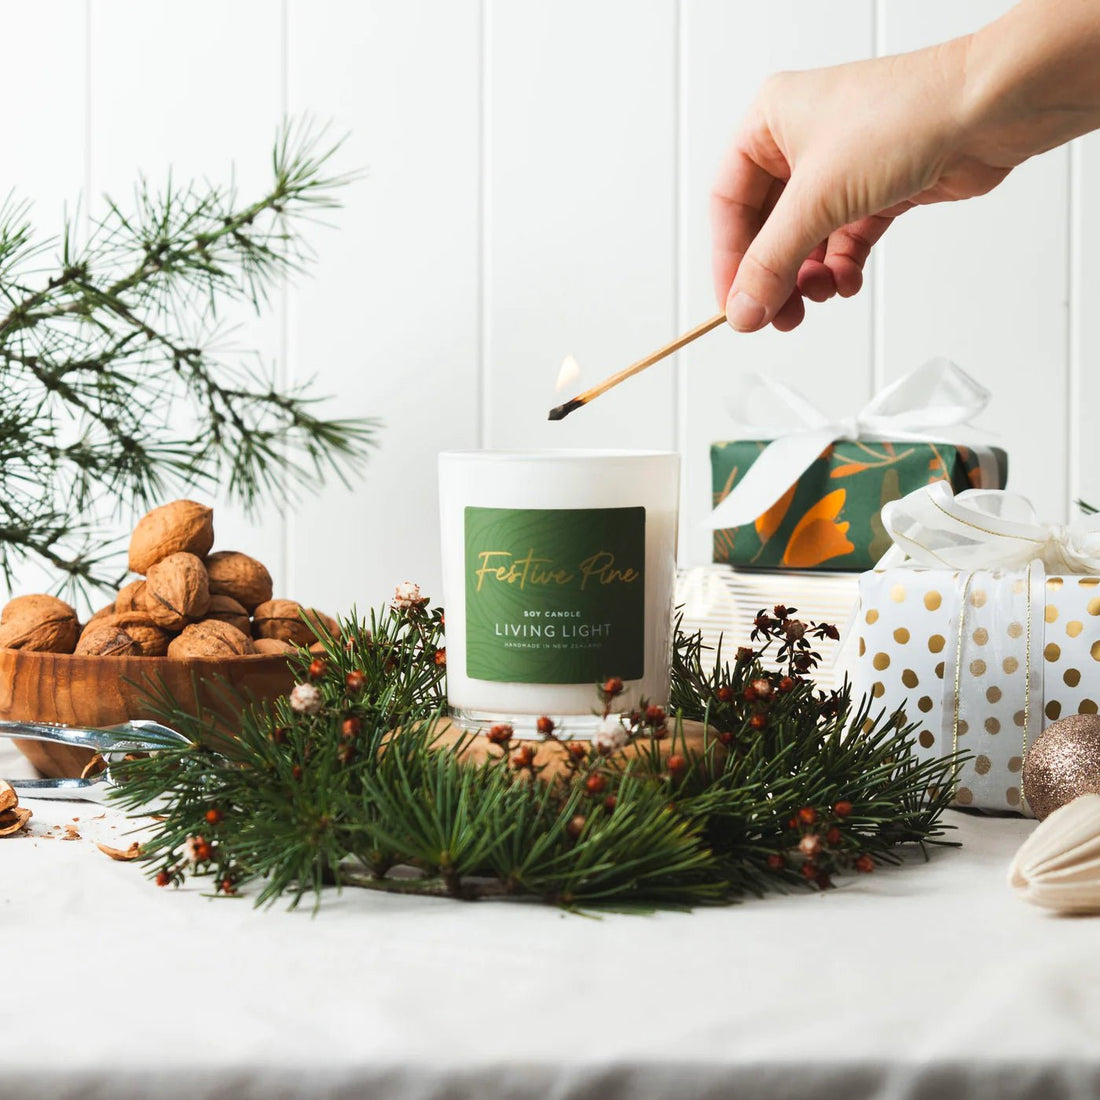 Living Light - Festive Pine Soy Candle - The Flower Crate